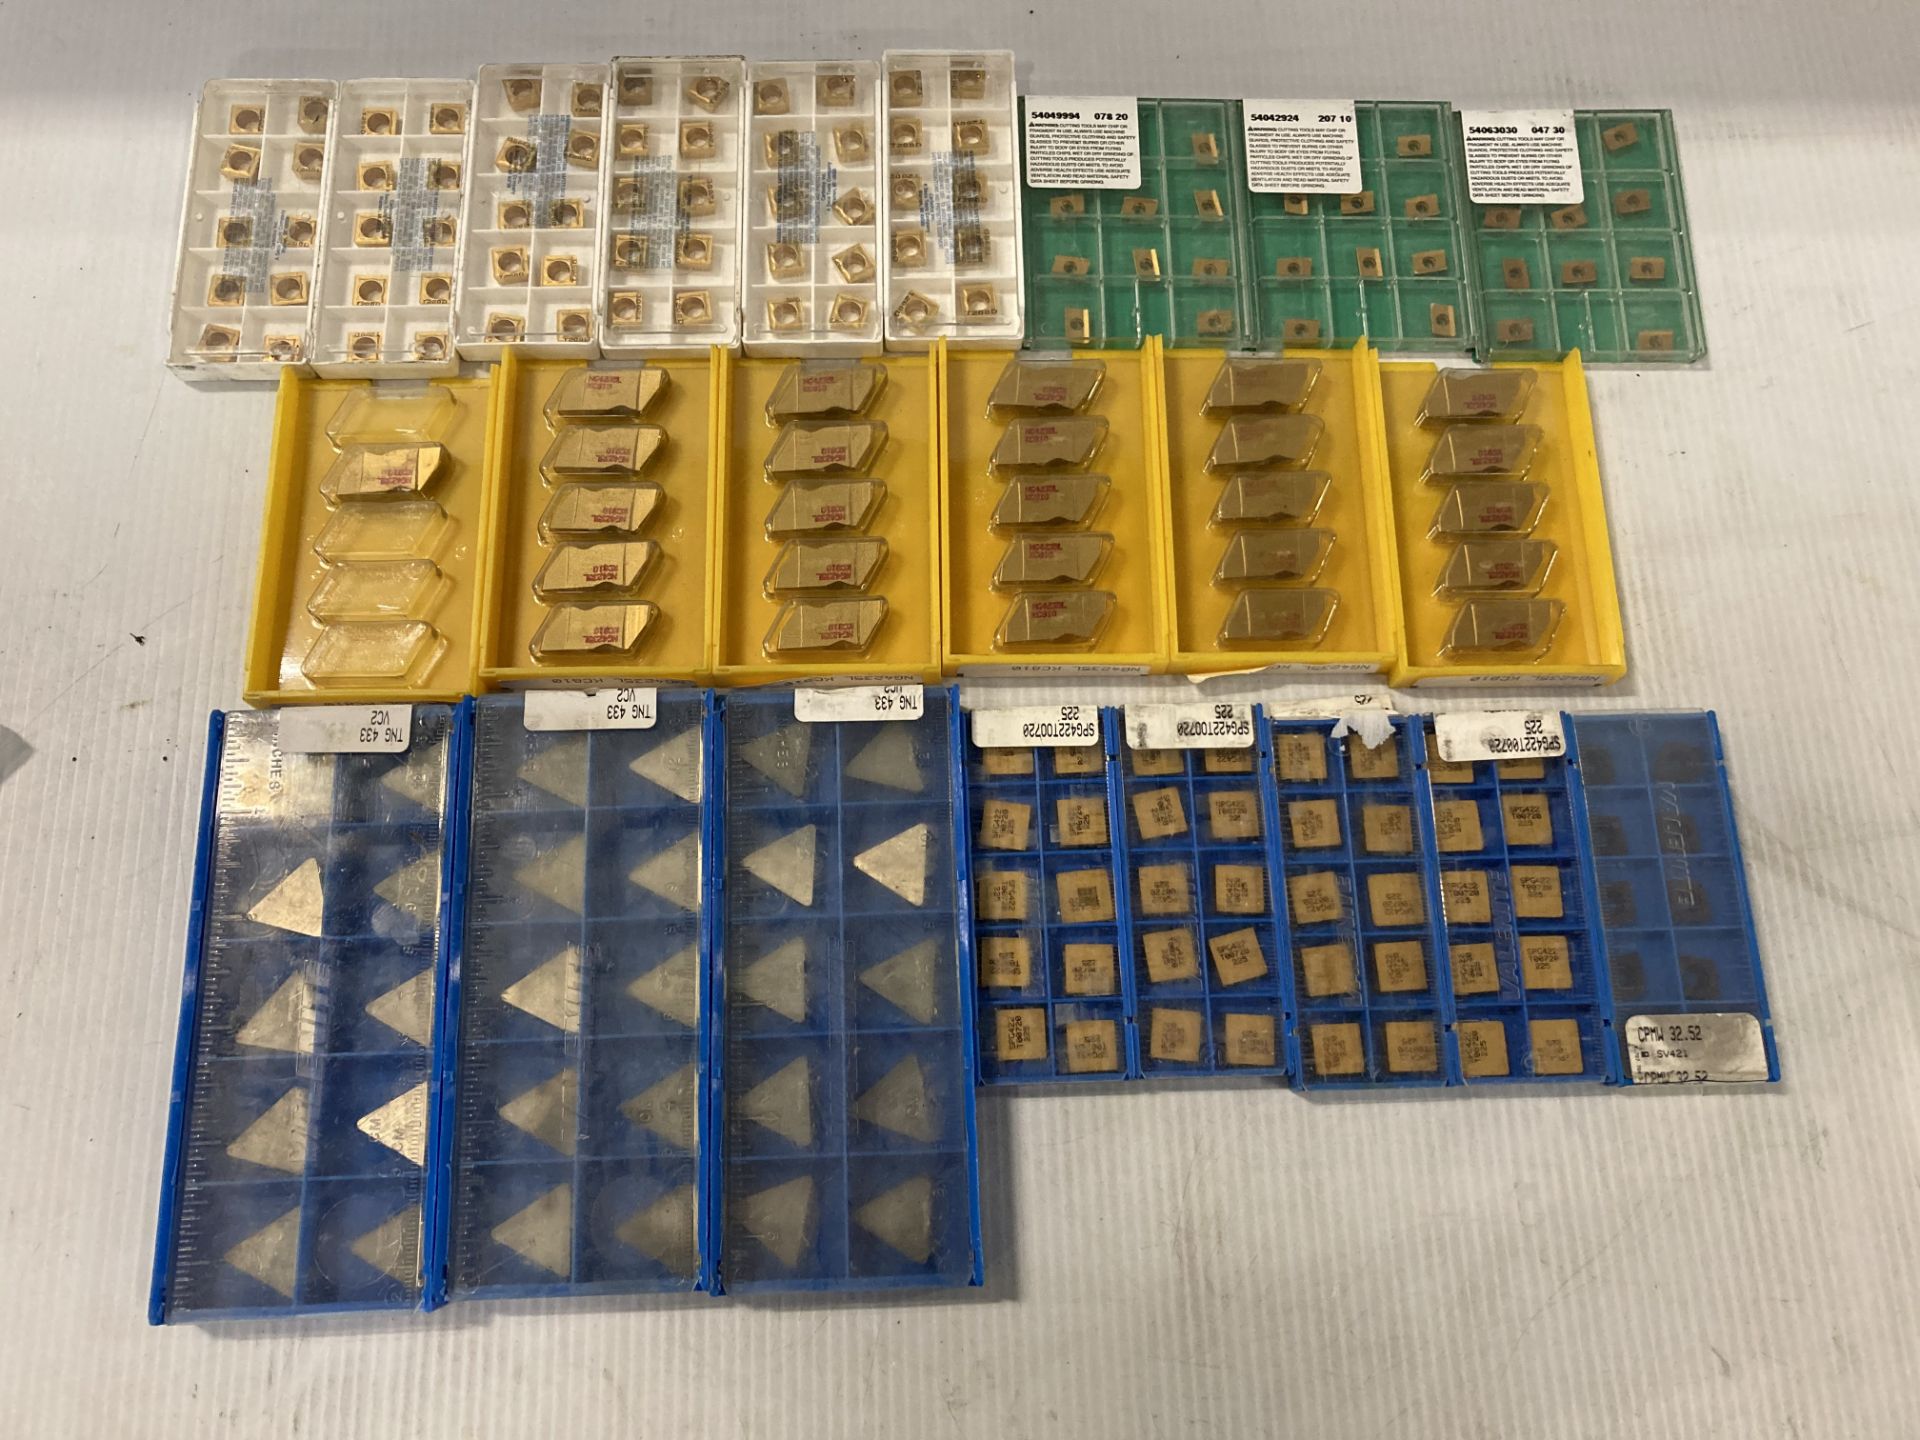 Lot of (190) New? Misc Carbide Inserts